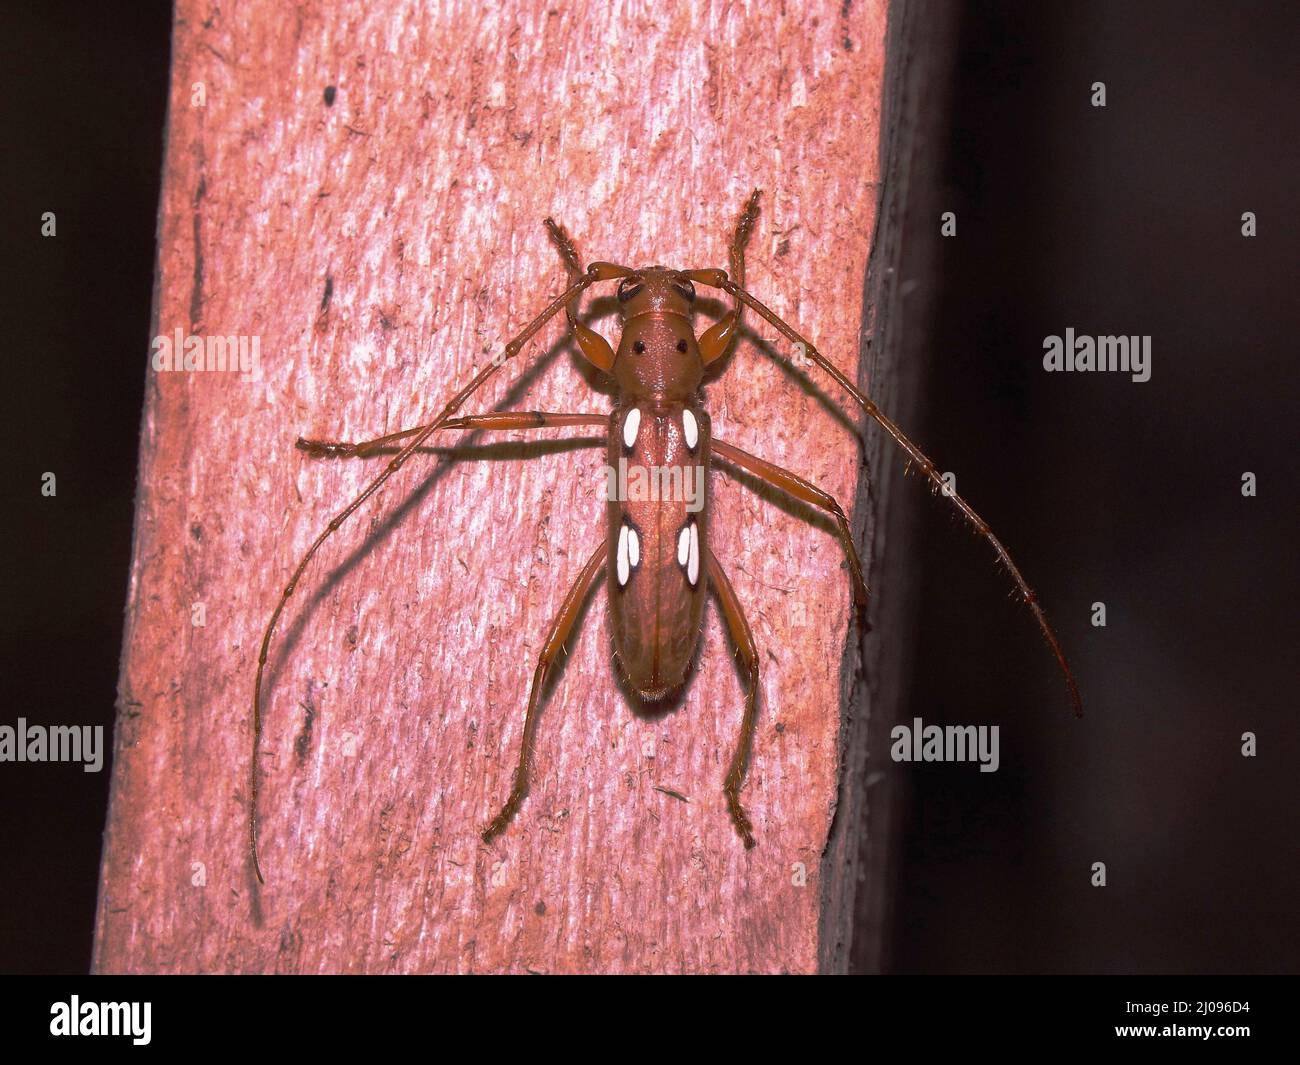 top view of a brown with white dots longhorn beetle (Cerambycidae) on a tree trunk isolated on a black background Stock Photo